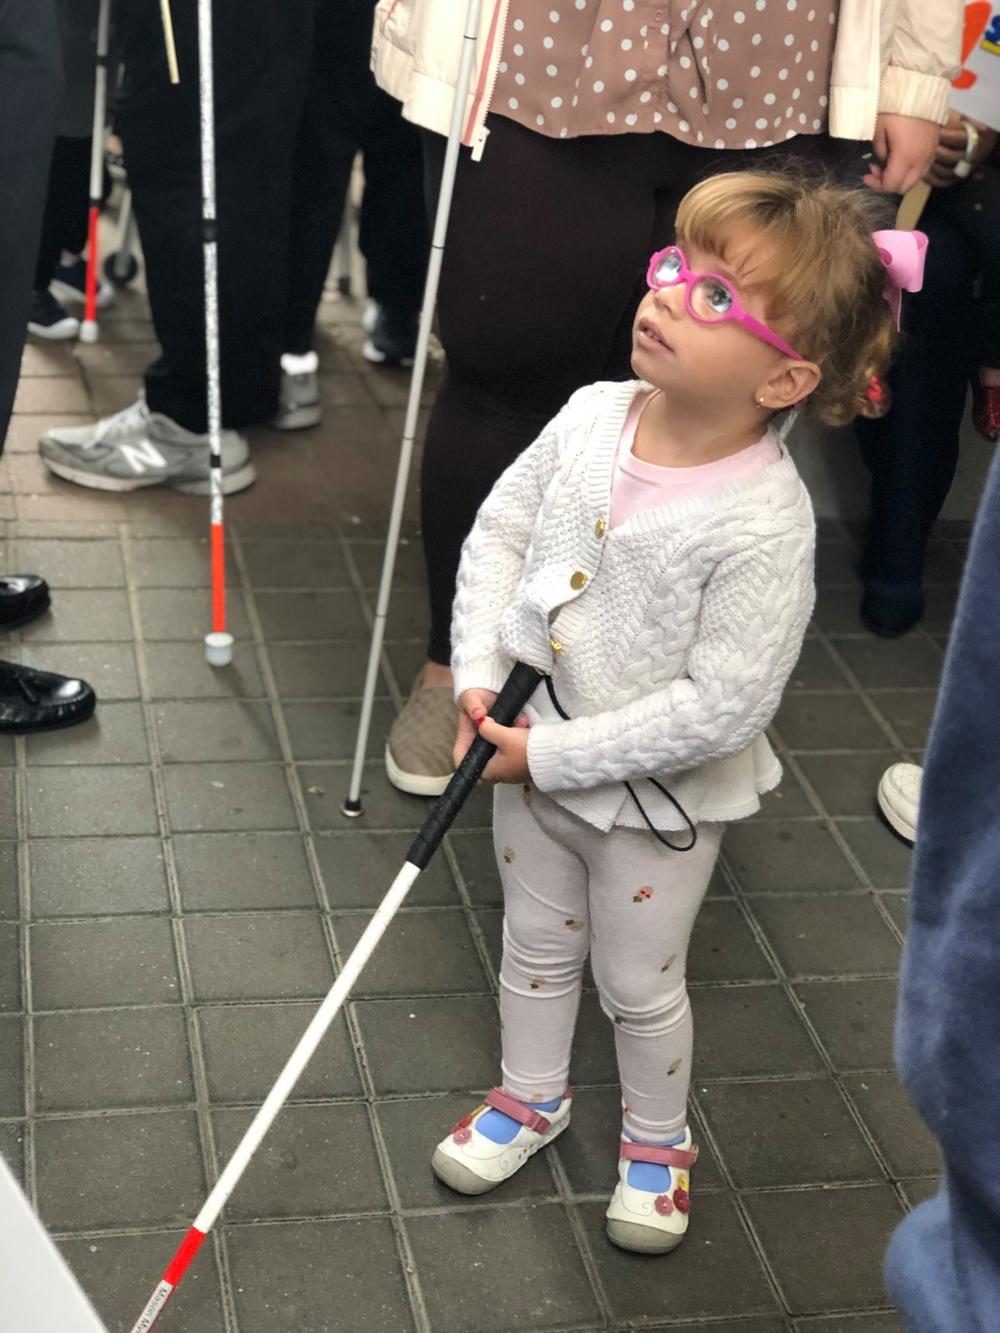 Toddler Class student holding her white cane ready to walk.